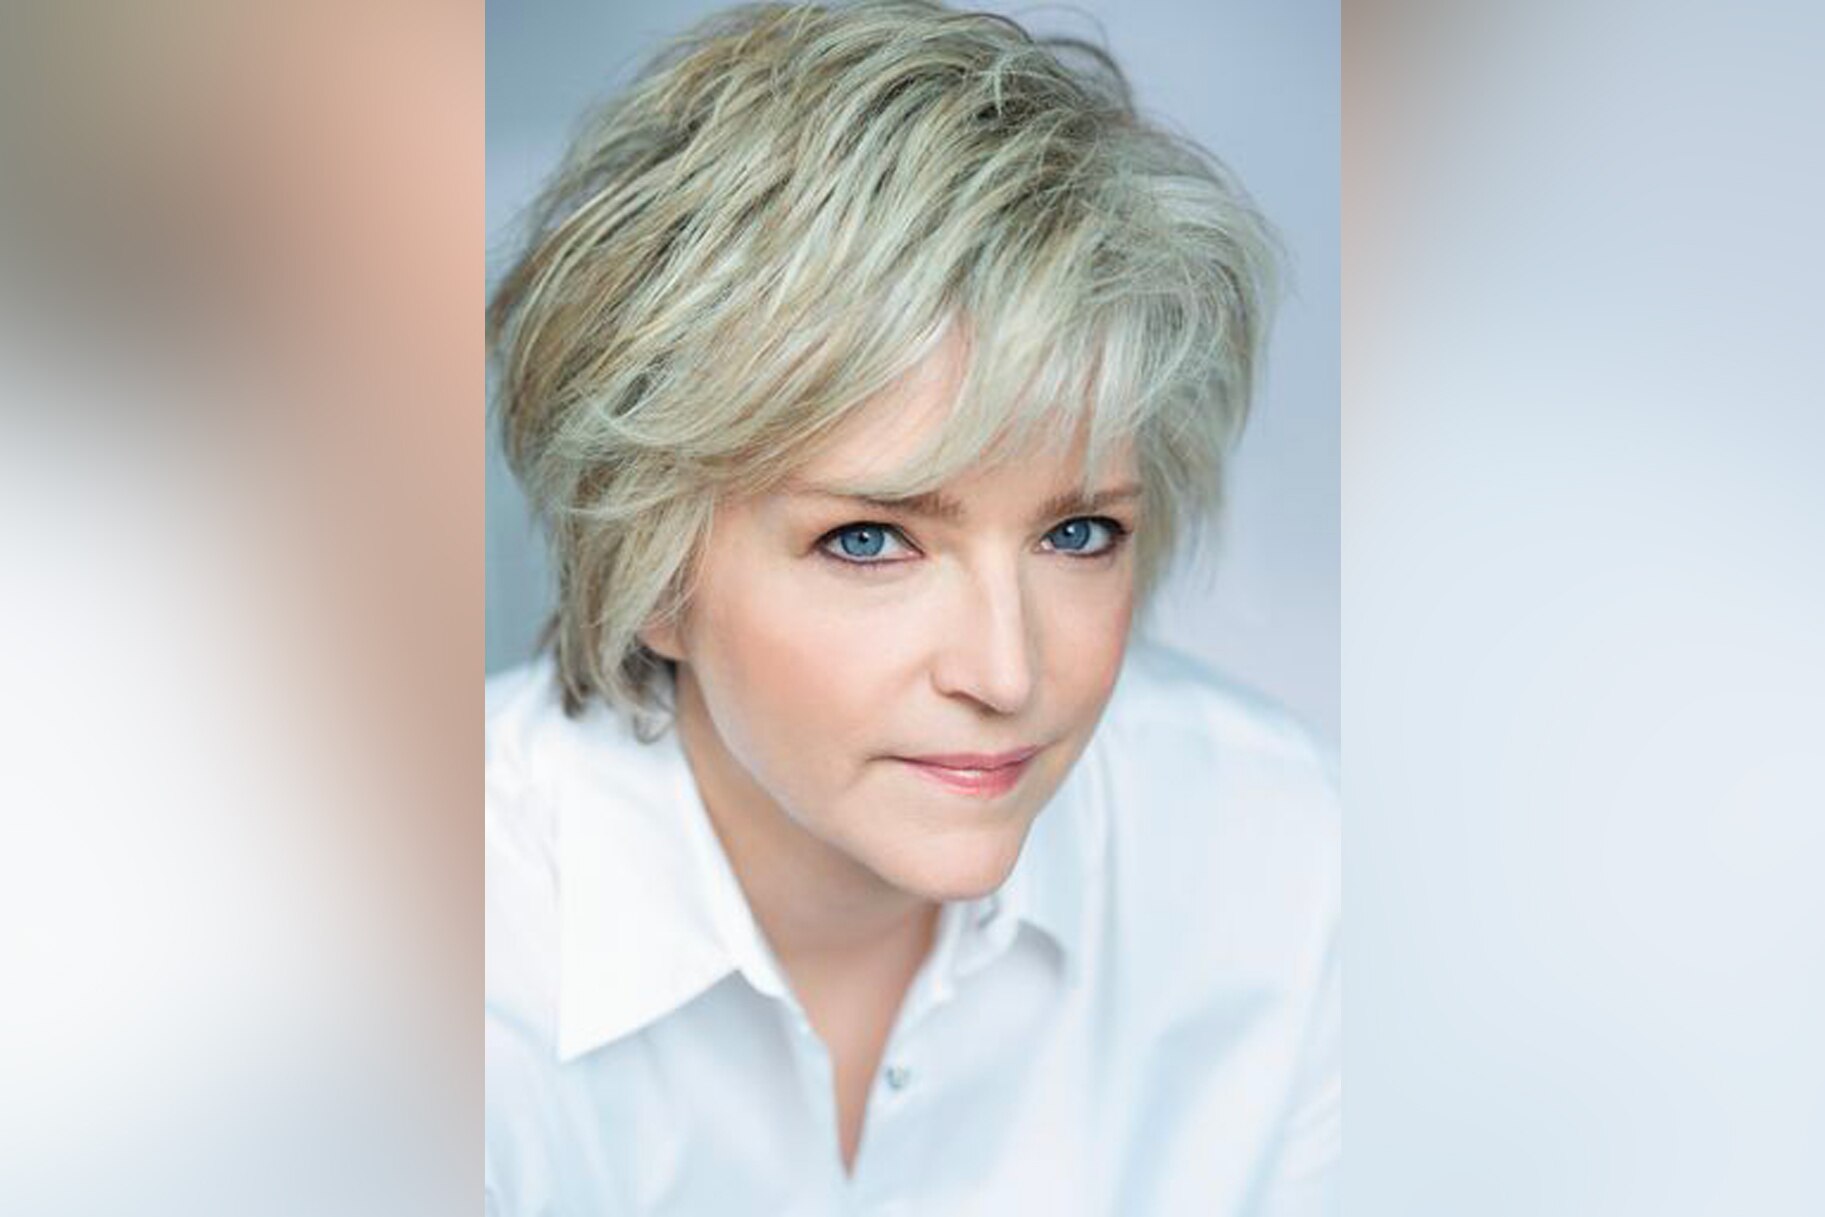 A photo of author Karin Slaughter